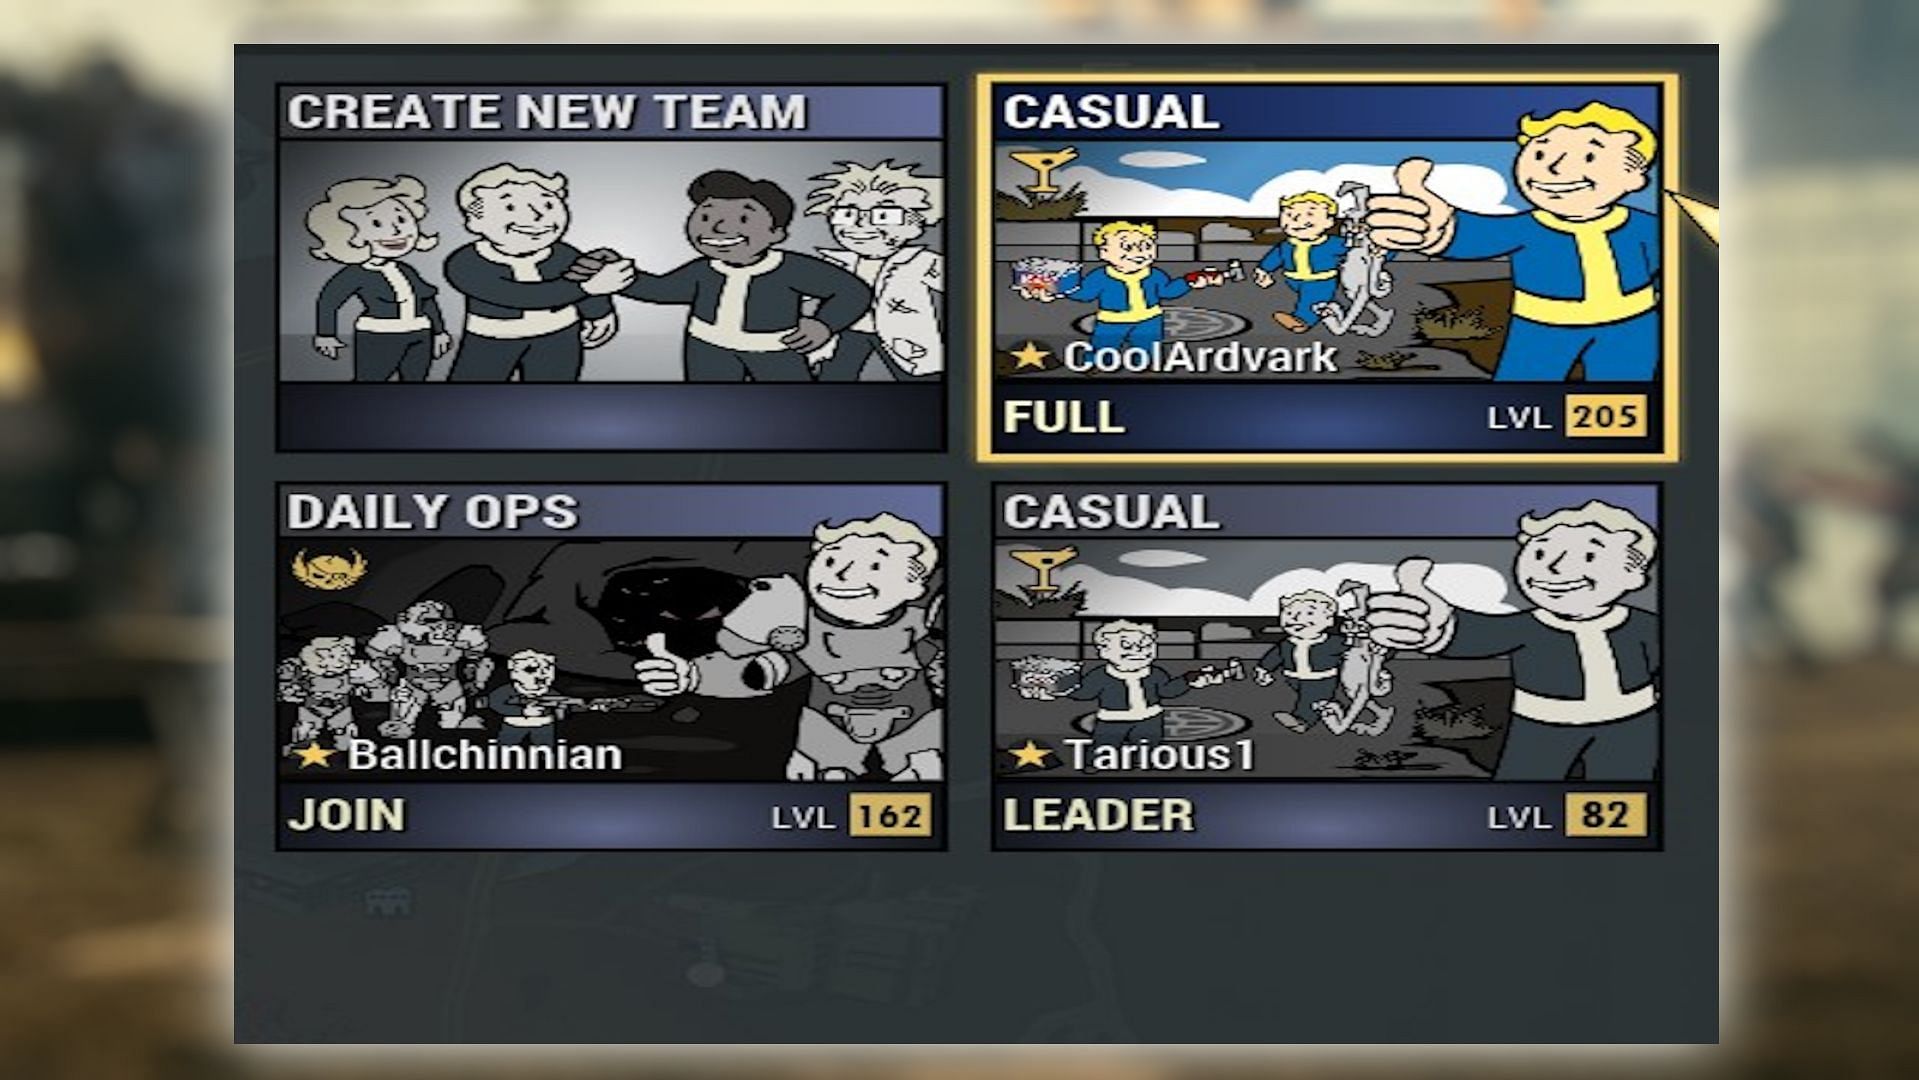 A Casual Team in the game (Image via Bethesda Game Studios)